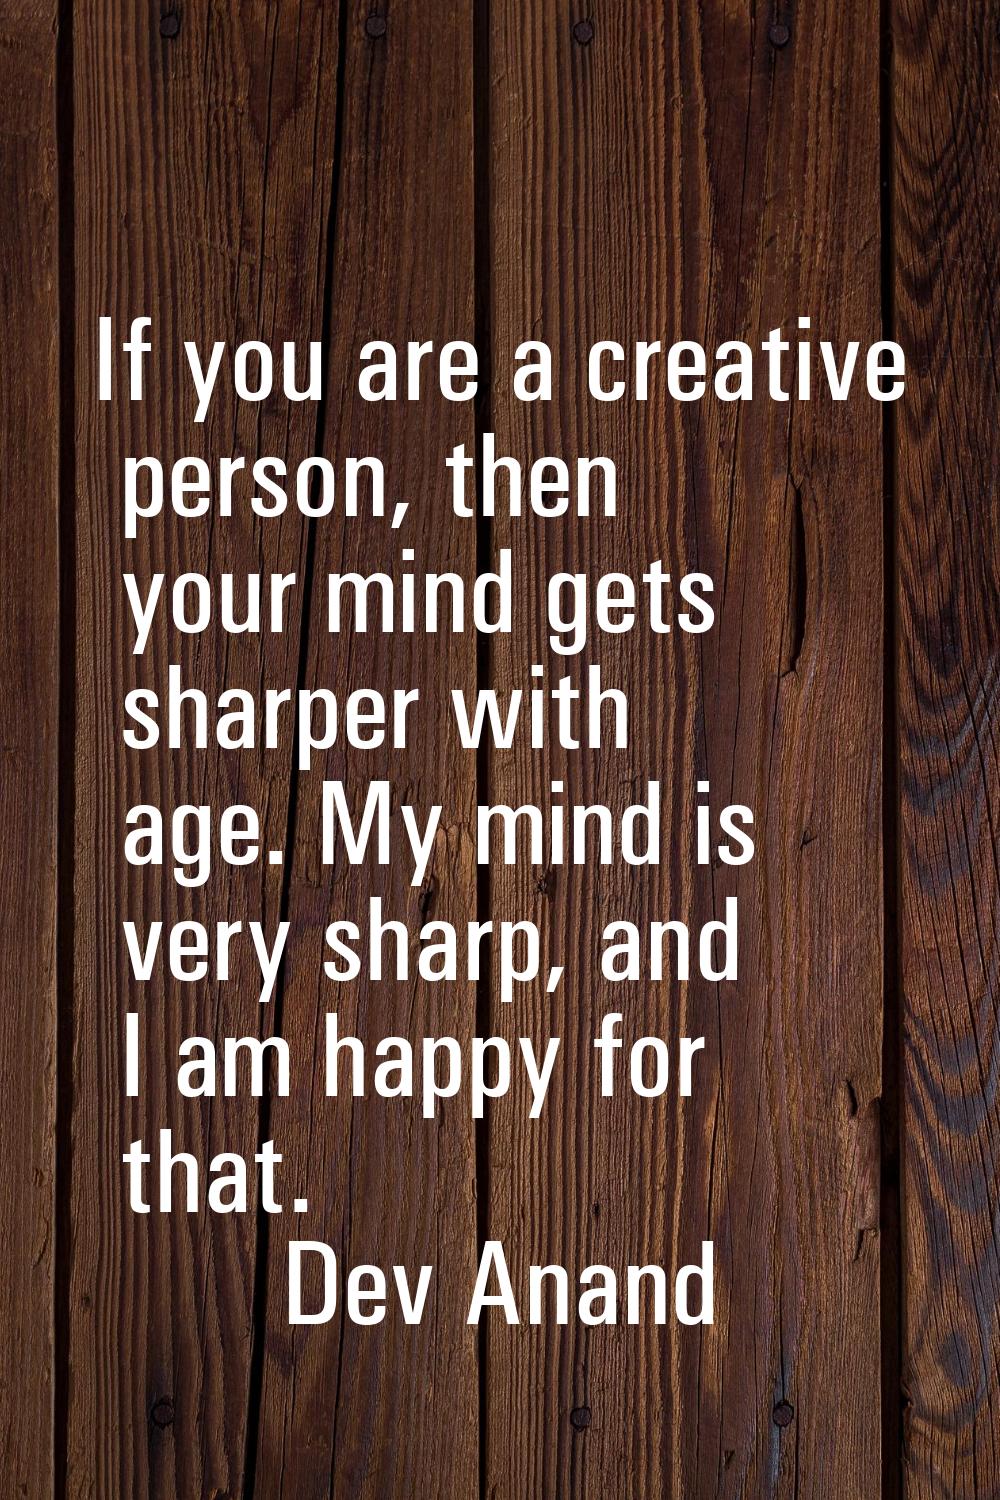 If you are a creative person, then your mind gets sharper with age. My mind is very sharp, and I am